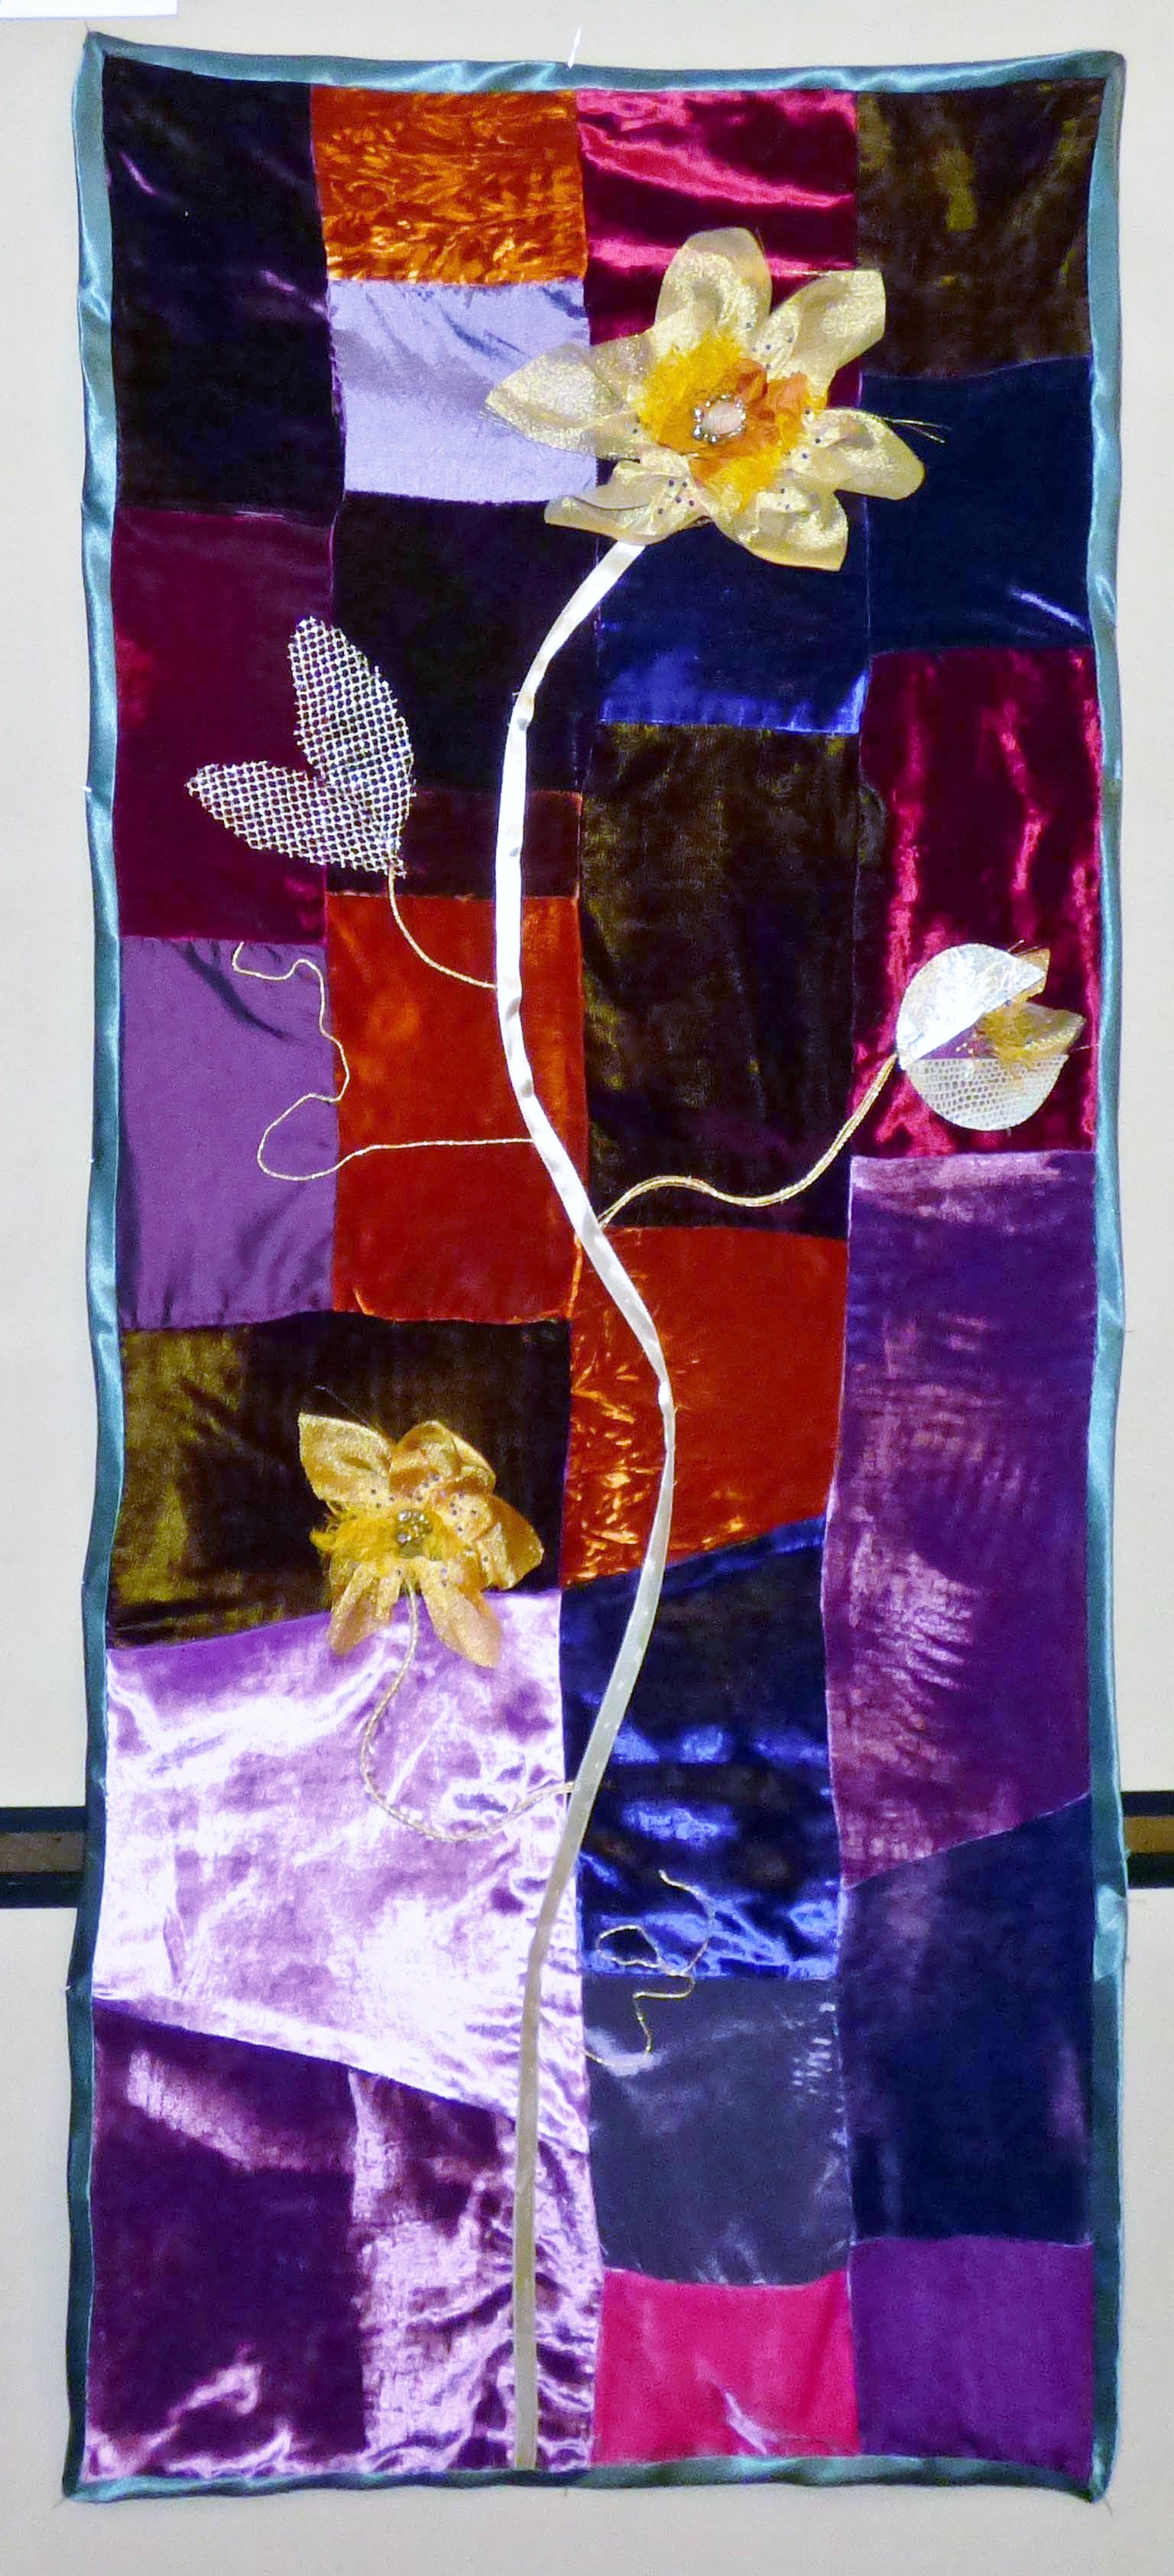 FLOWERS ON A STAINED GLASS PANEL by Sarah Lowes, silk velvet, chiffon, silk, gold work, beads, Exhibition at All Hallows Church, September 2022